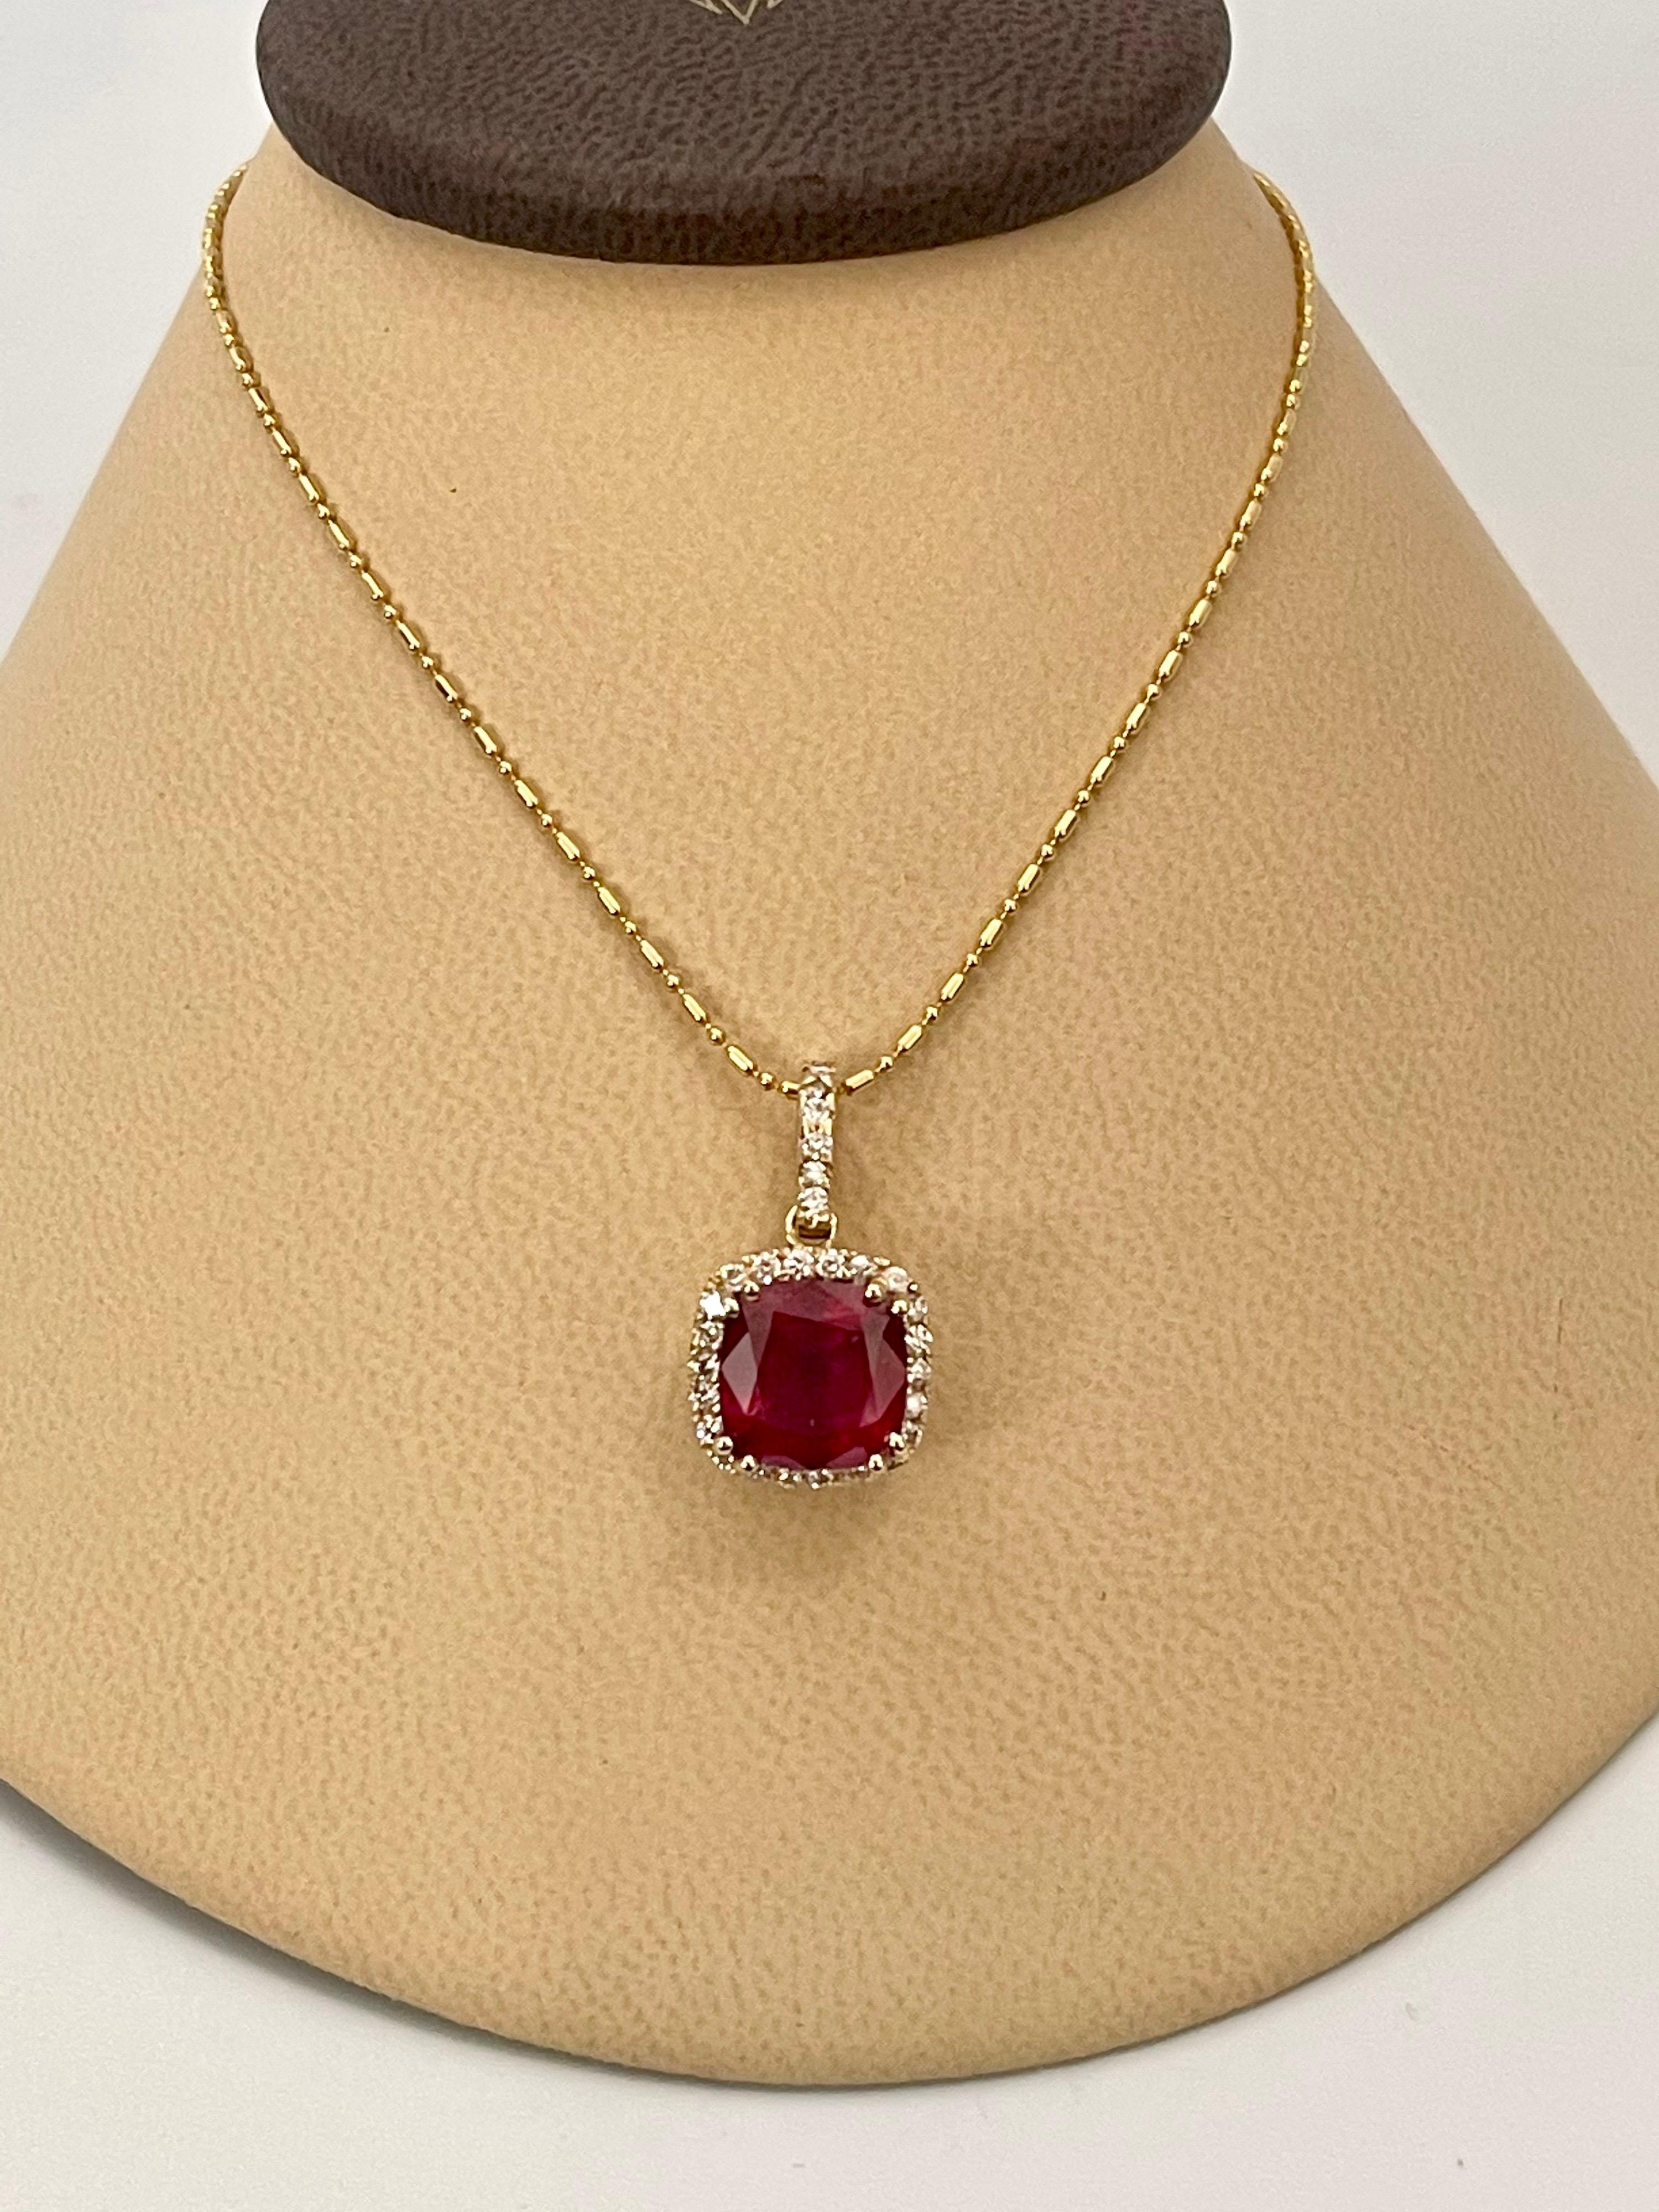 Approximately 3 to 3.5 Carat Cushion Cut Ruby Pendant or Necklace 14 Karat Yellow Gold with Chain 18